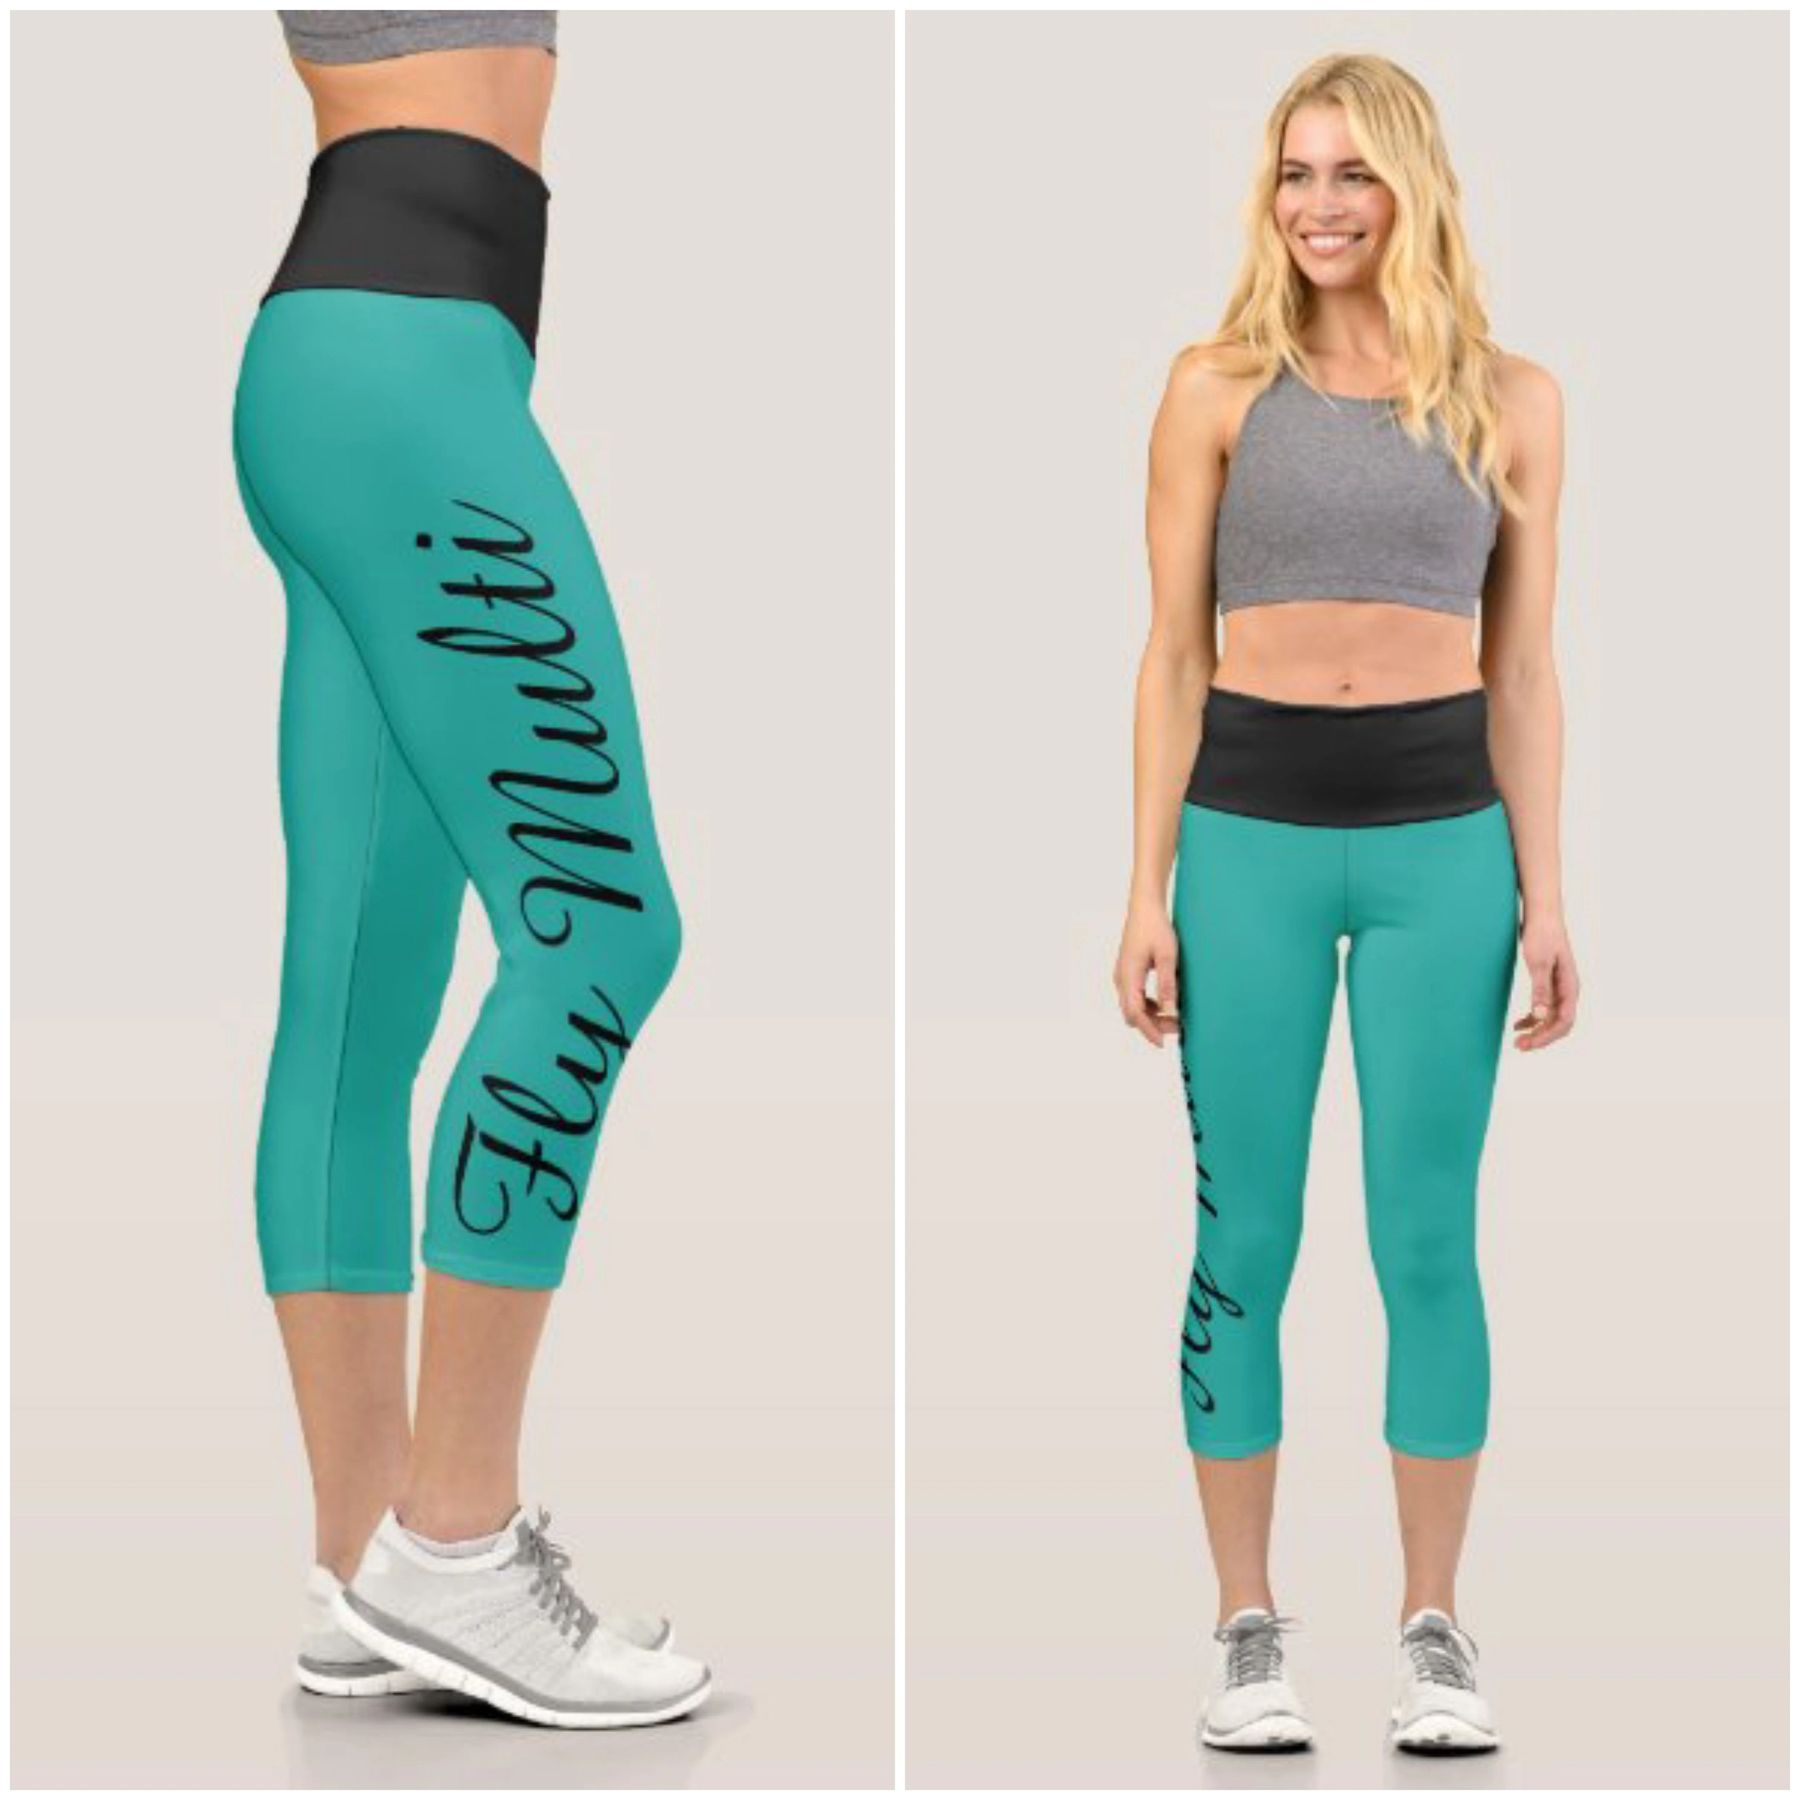 High Waisted Capri-Length Leggings For Women with Brand Name Printed on  Right Leg. (Color: Red with Green Letters, Sizes: Small (4-6))